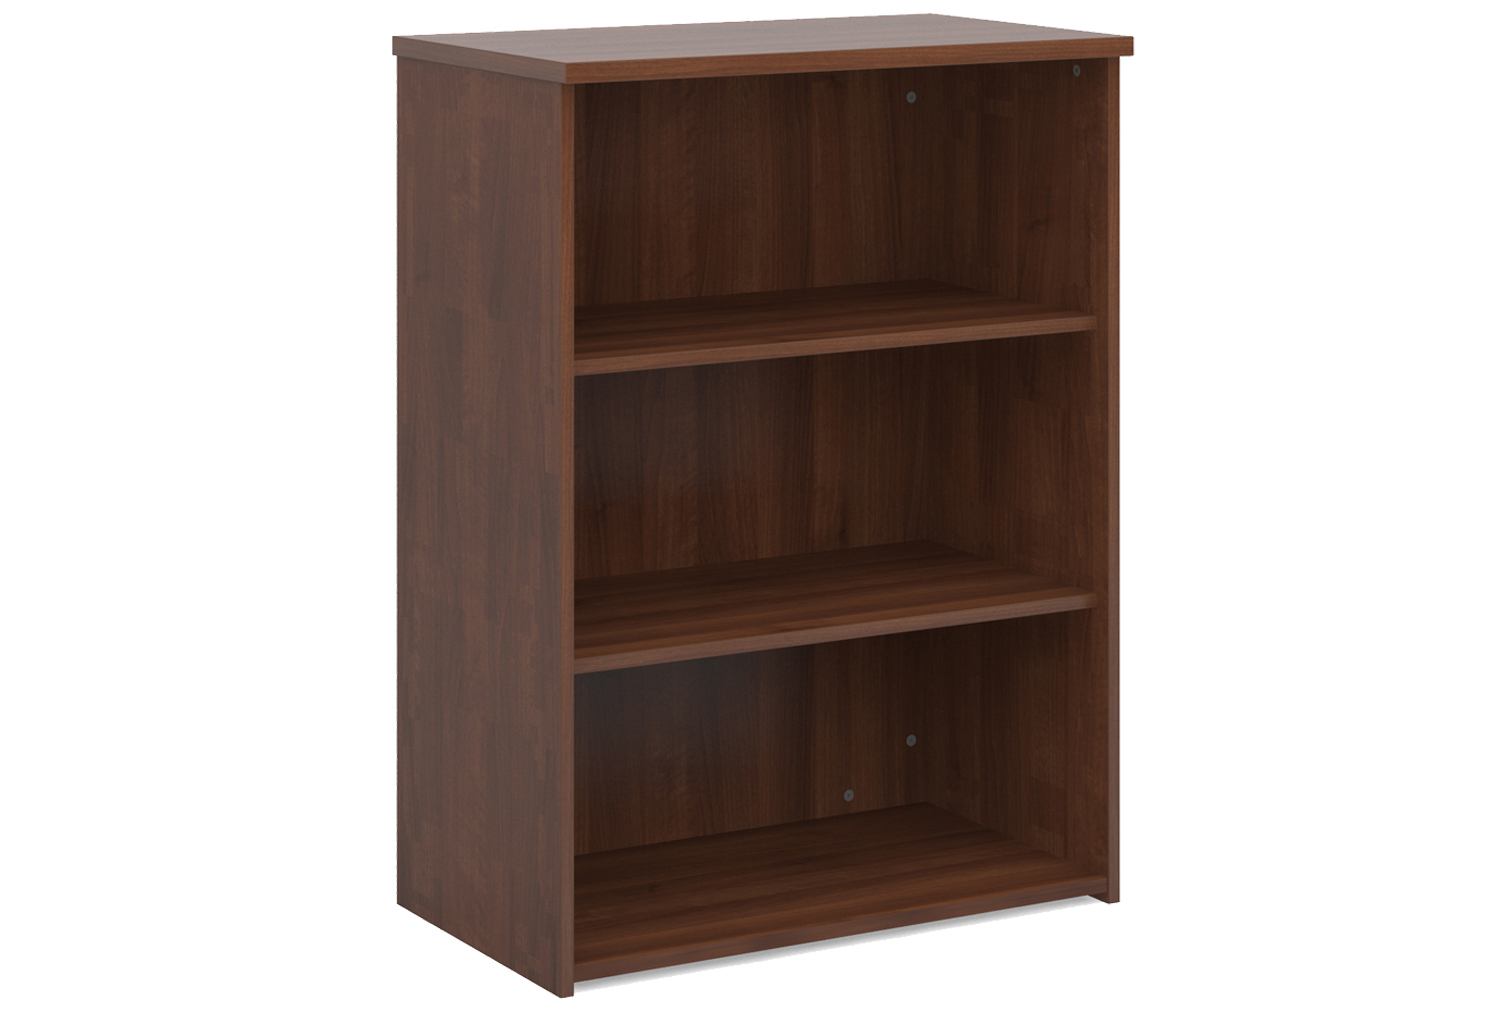 All Walnut Office Bookcases, 2 Shelf - 80wx47dx109h (cm), Fully Installed